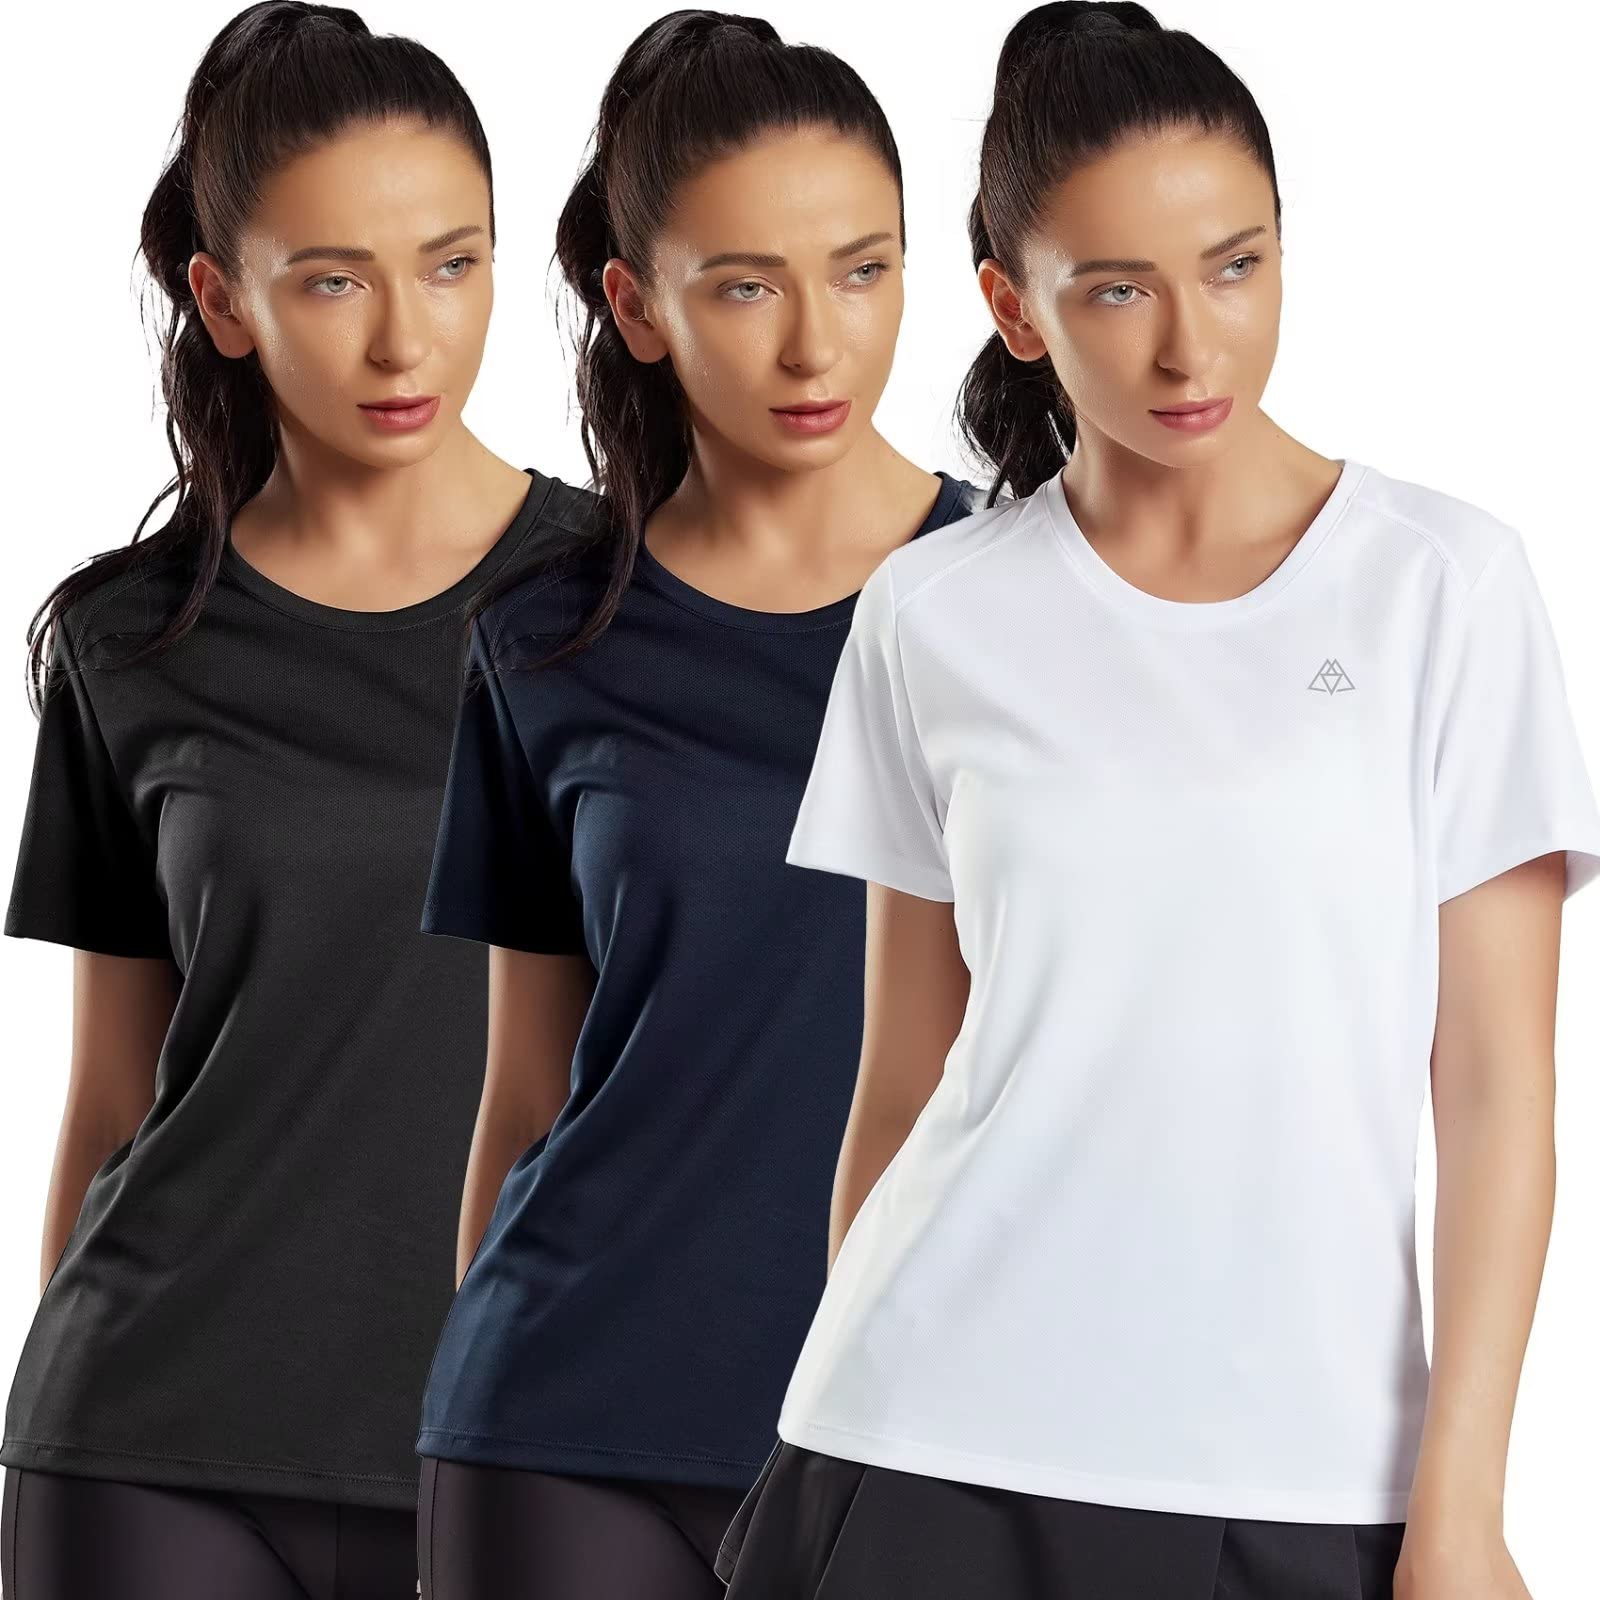  Haimont Women's Athletic Performance T-Shirts